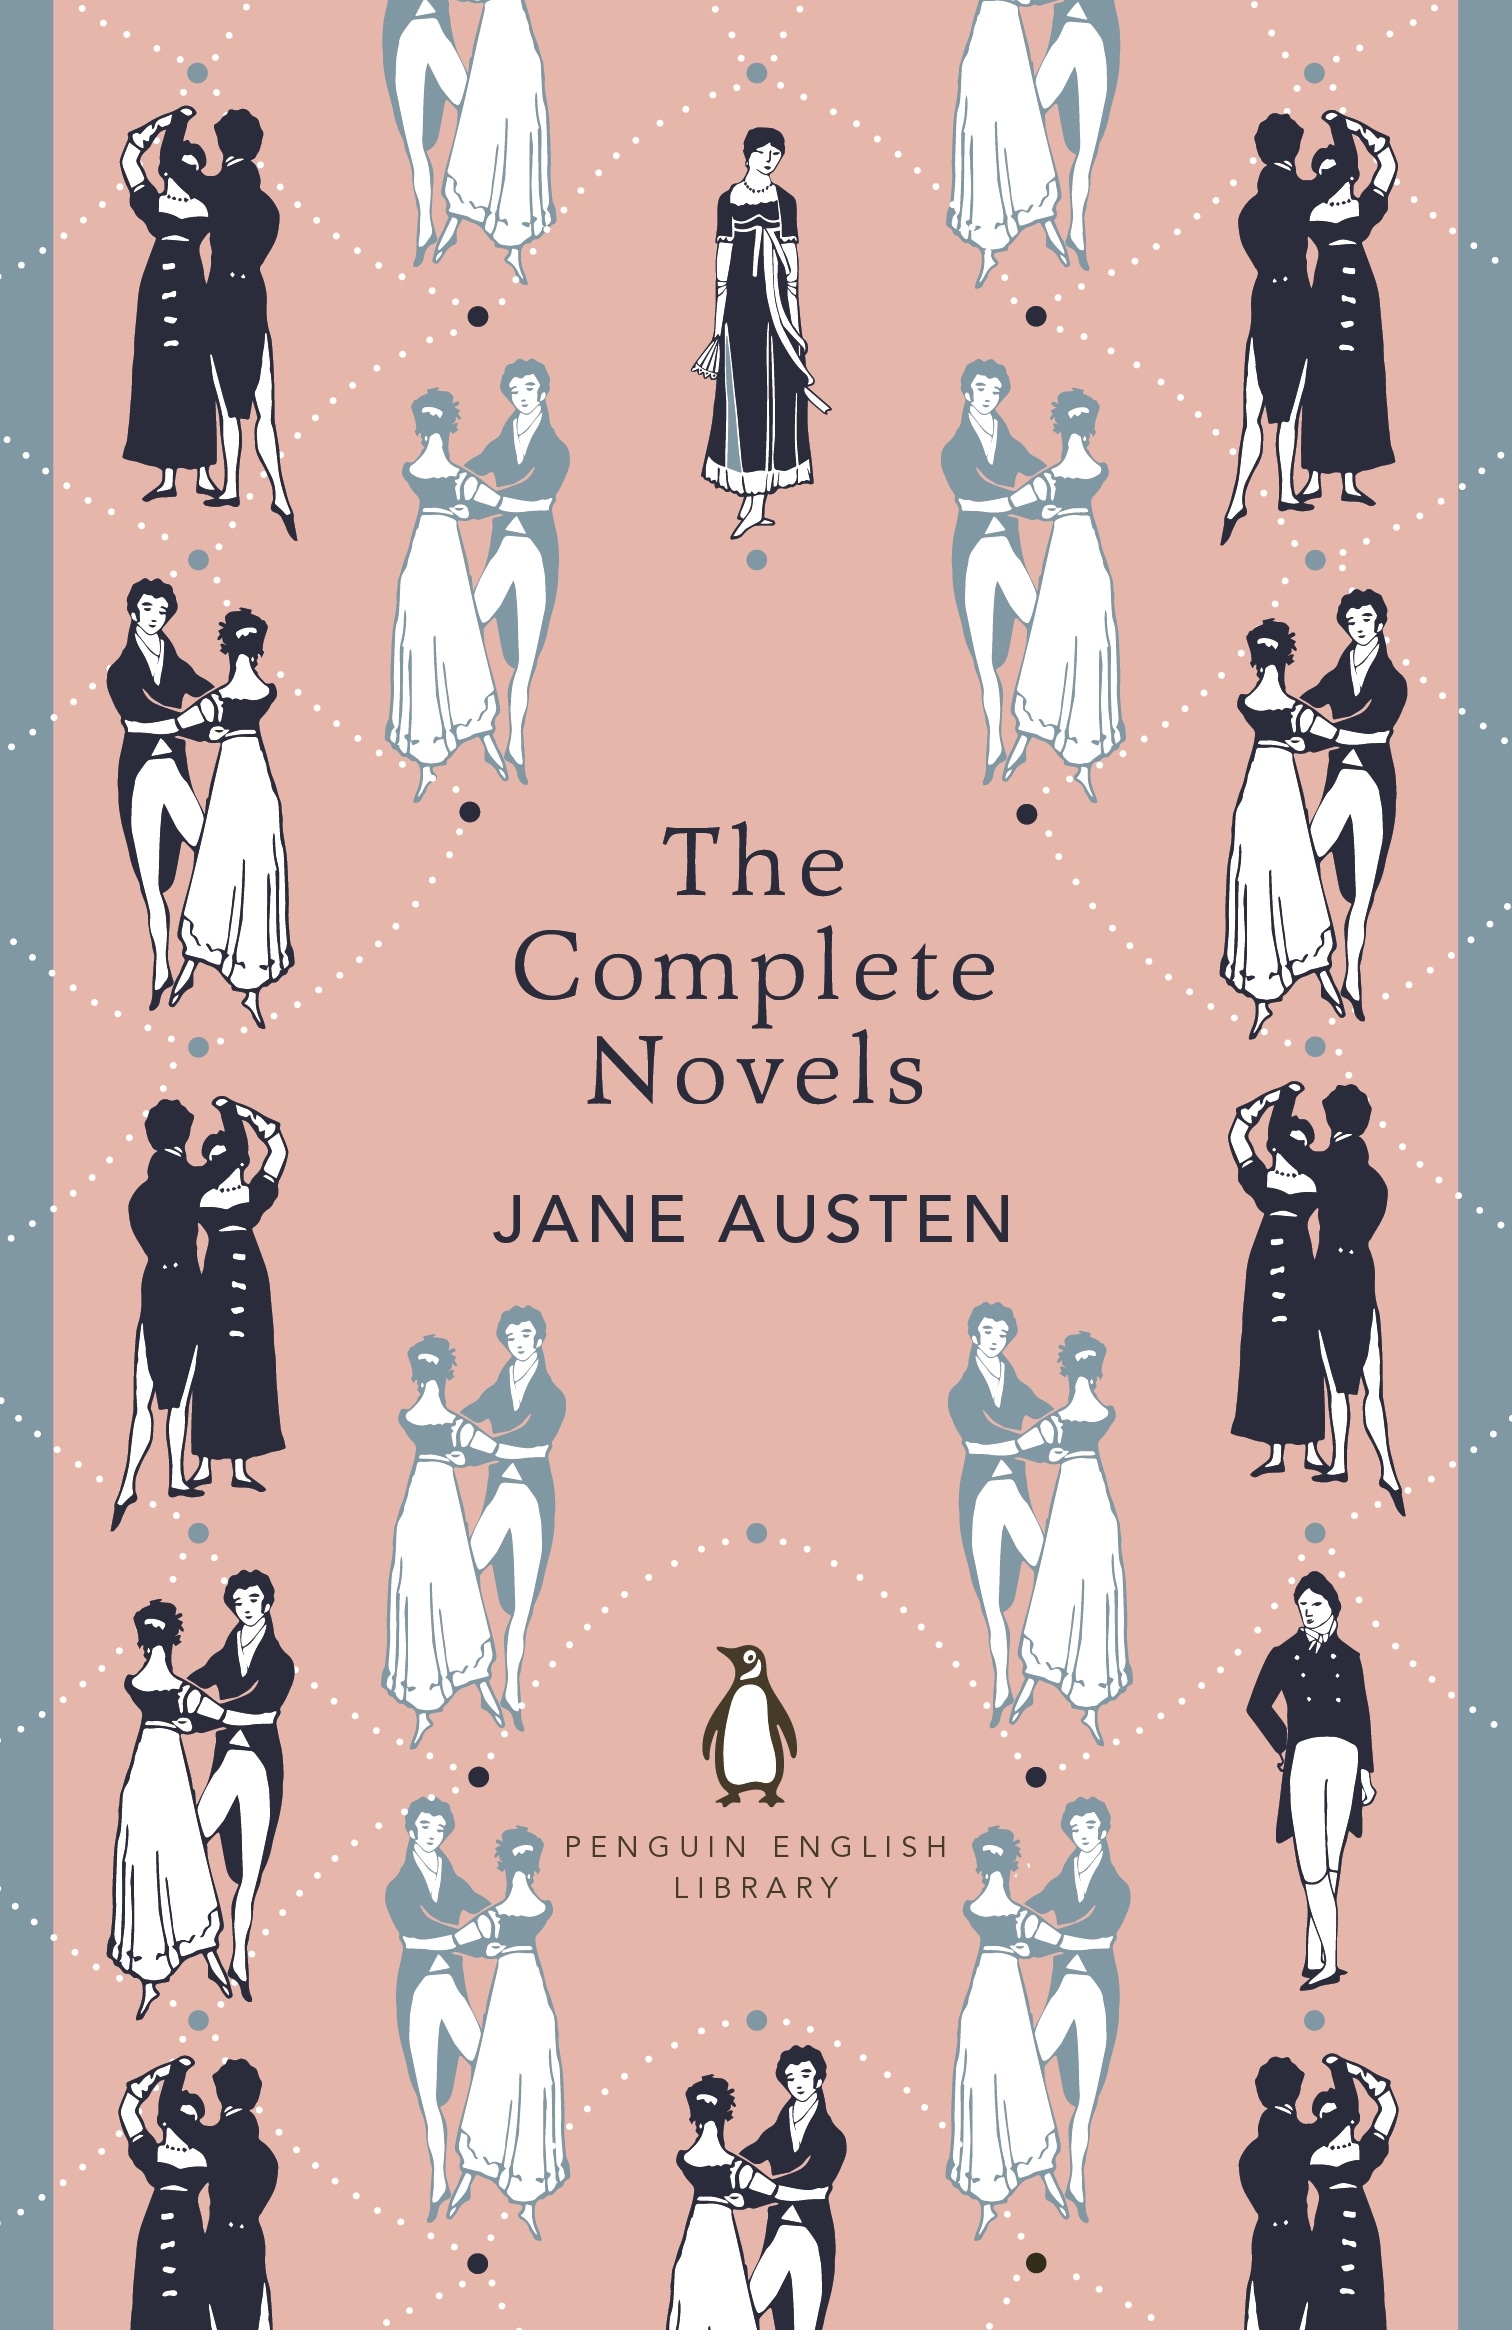 Book “The Complete Novels of Jane Austen” by Jane Austen — May 7, 2020